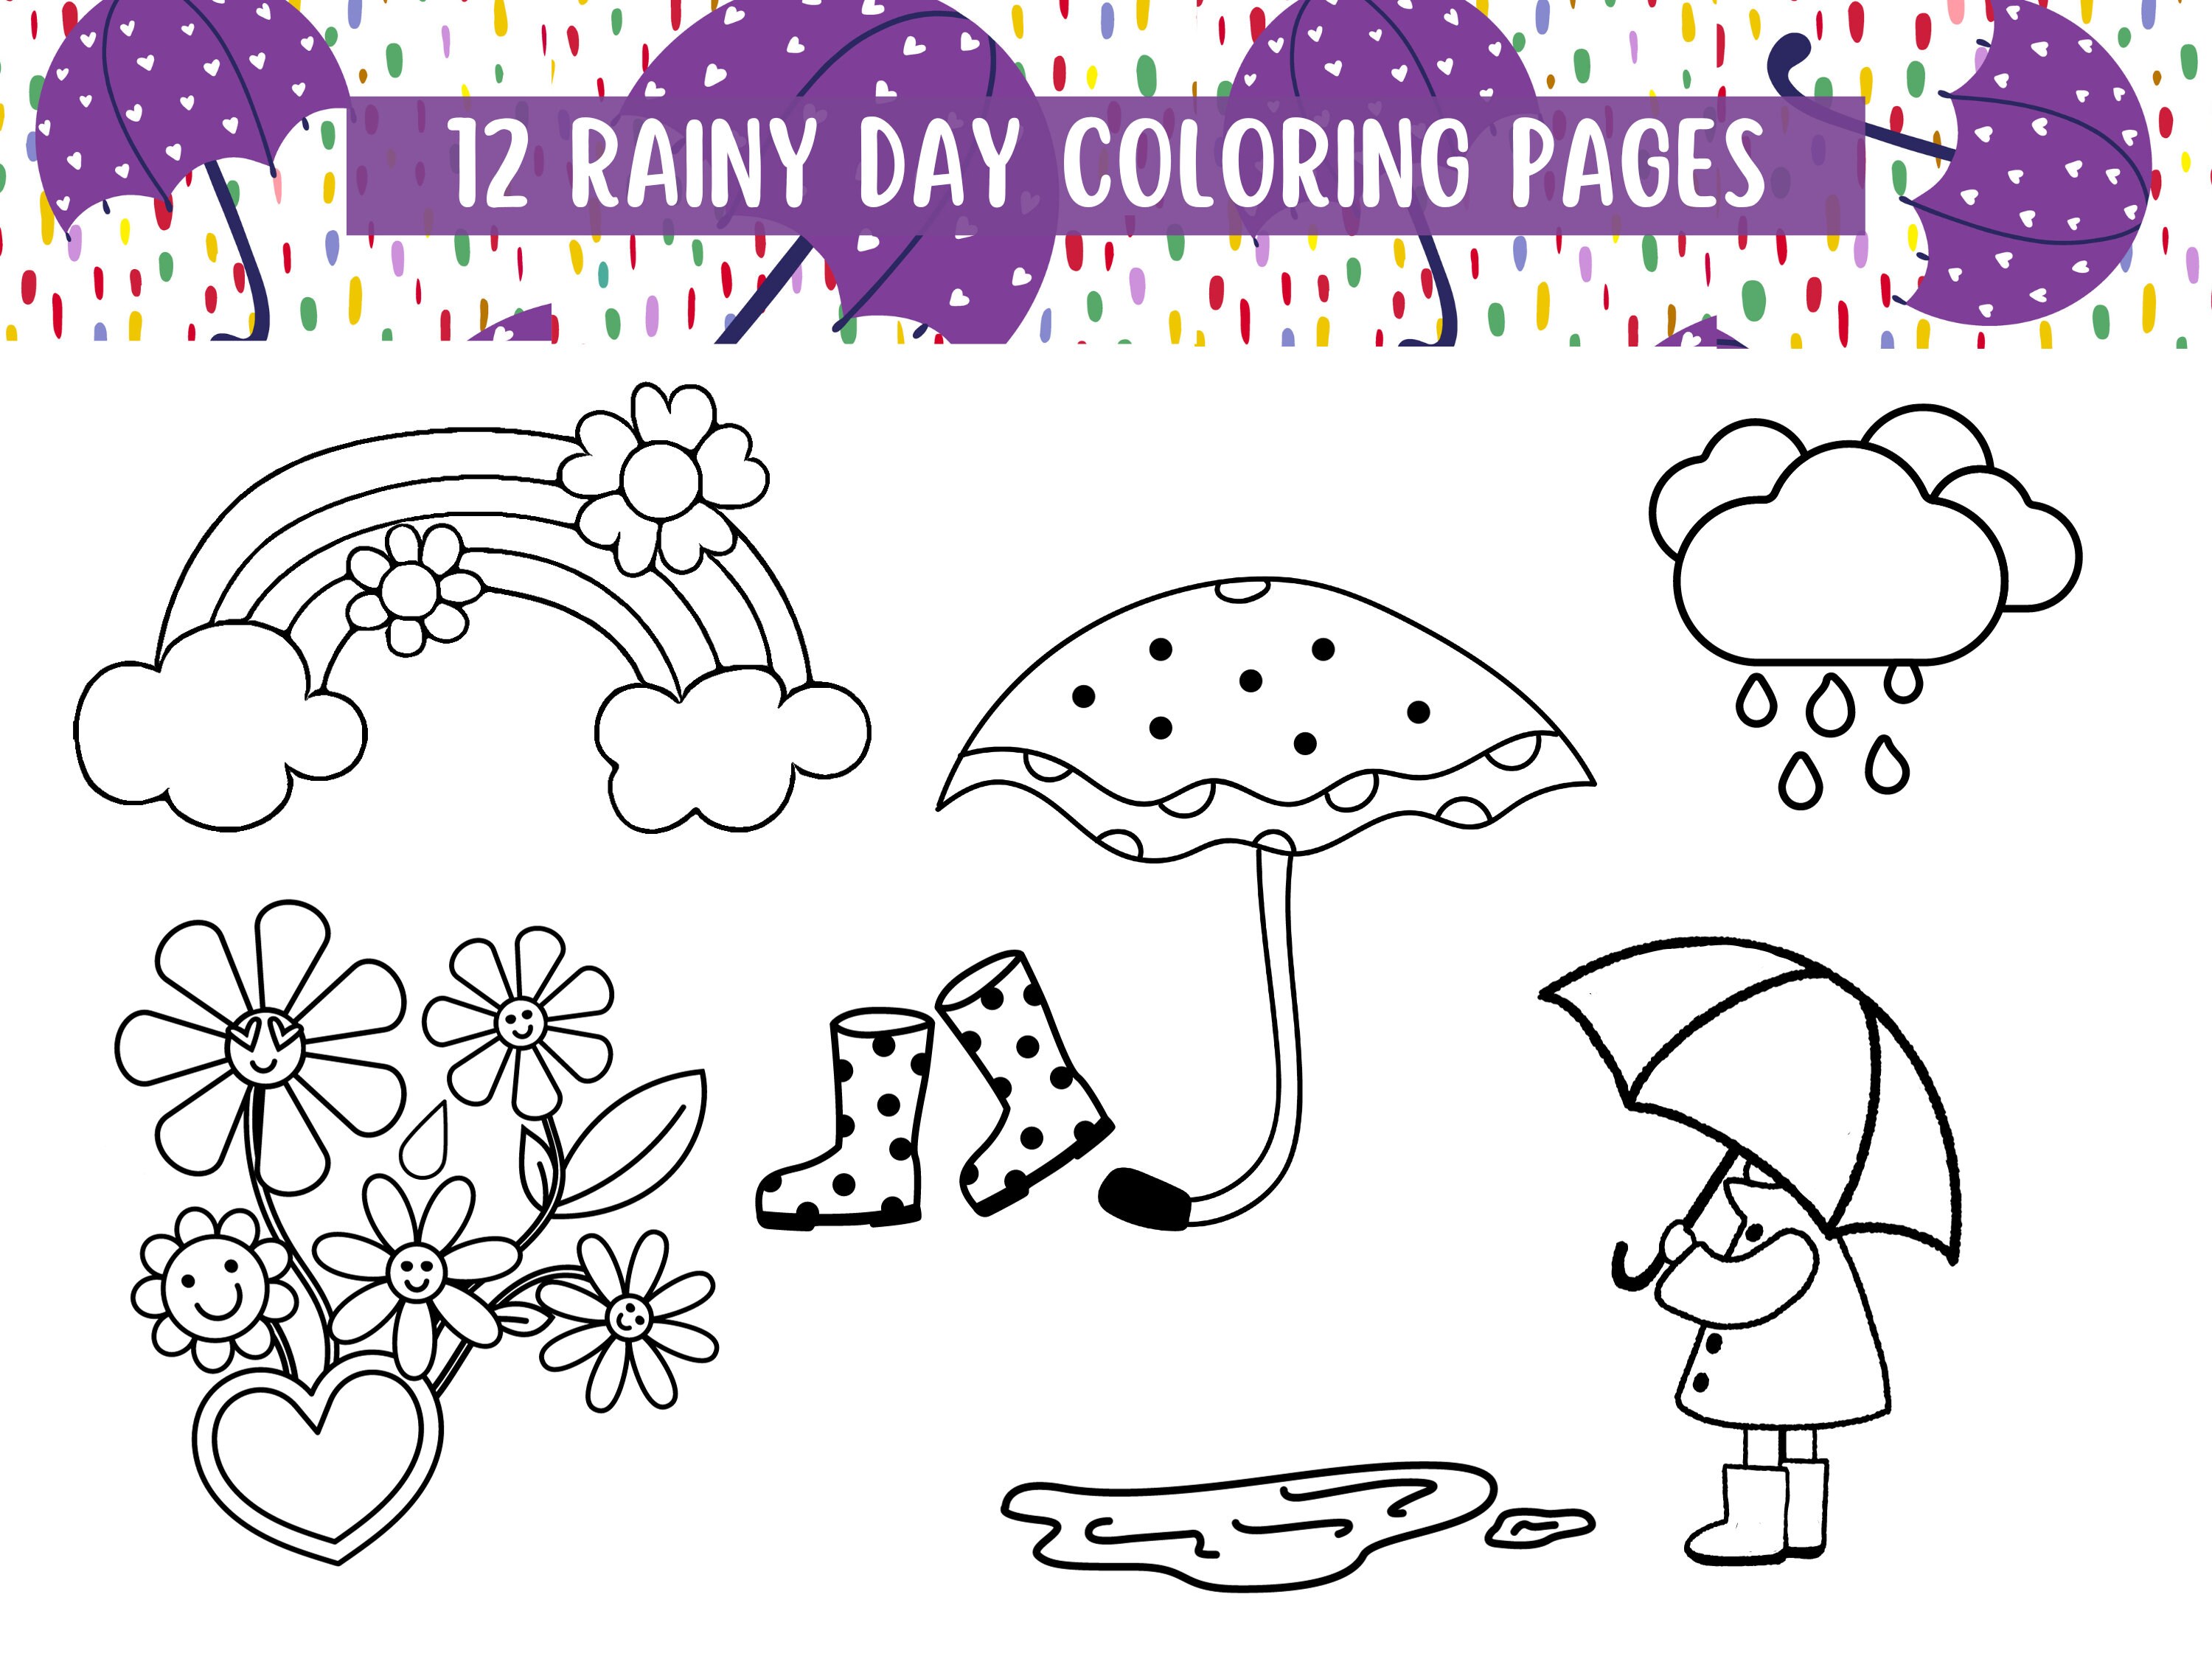 Rainy day coloring pages for girls and boys cute printable color sheets kids coloring fun easy color pages instant download instant download